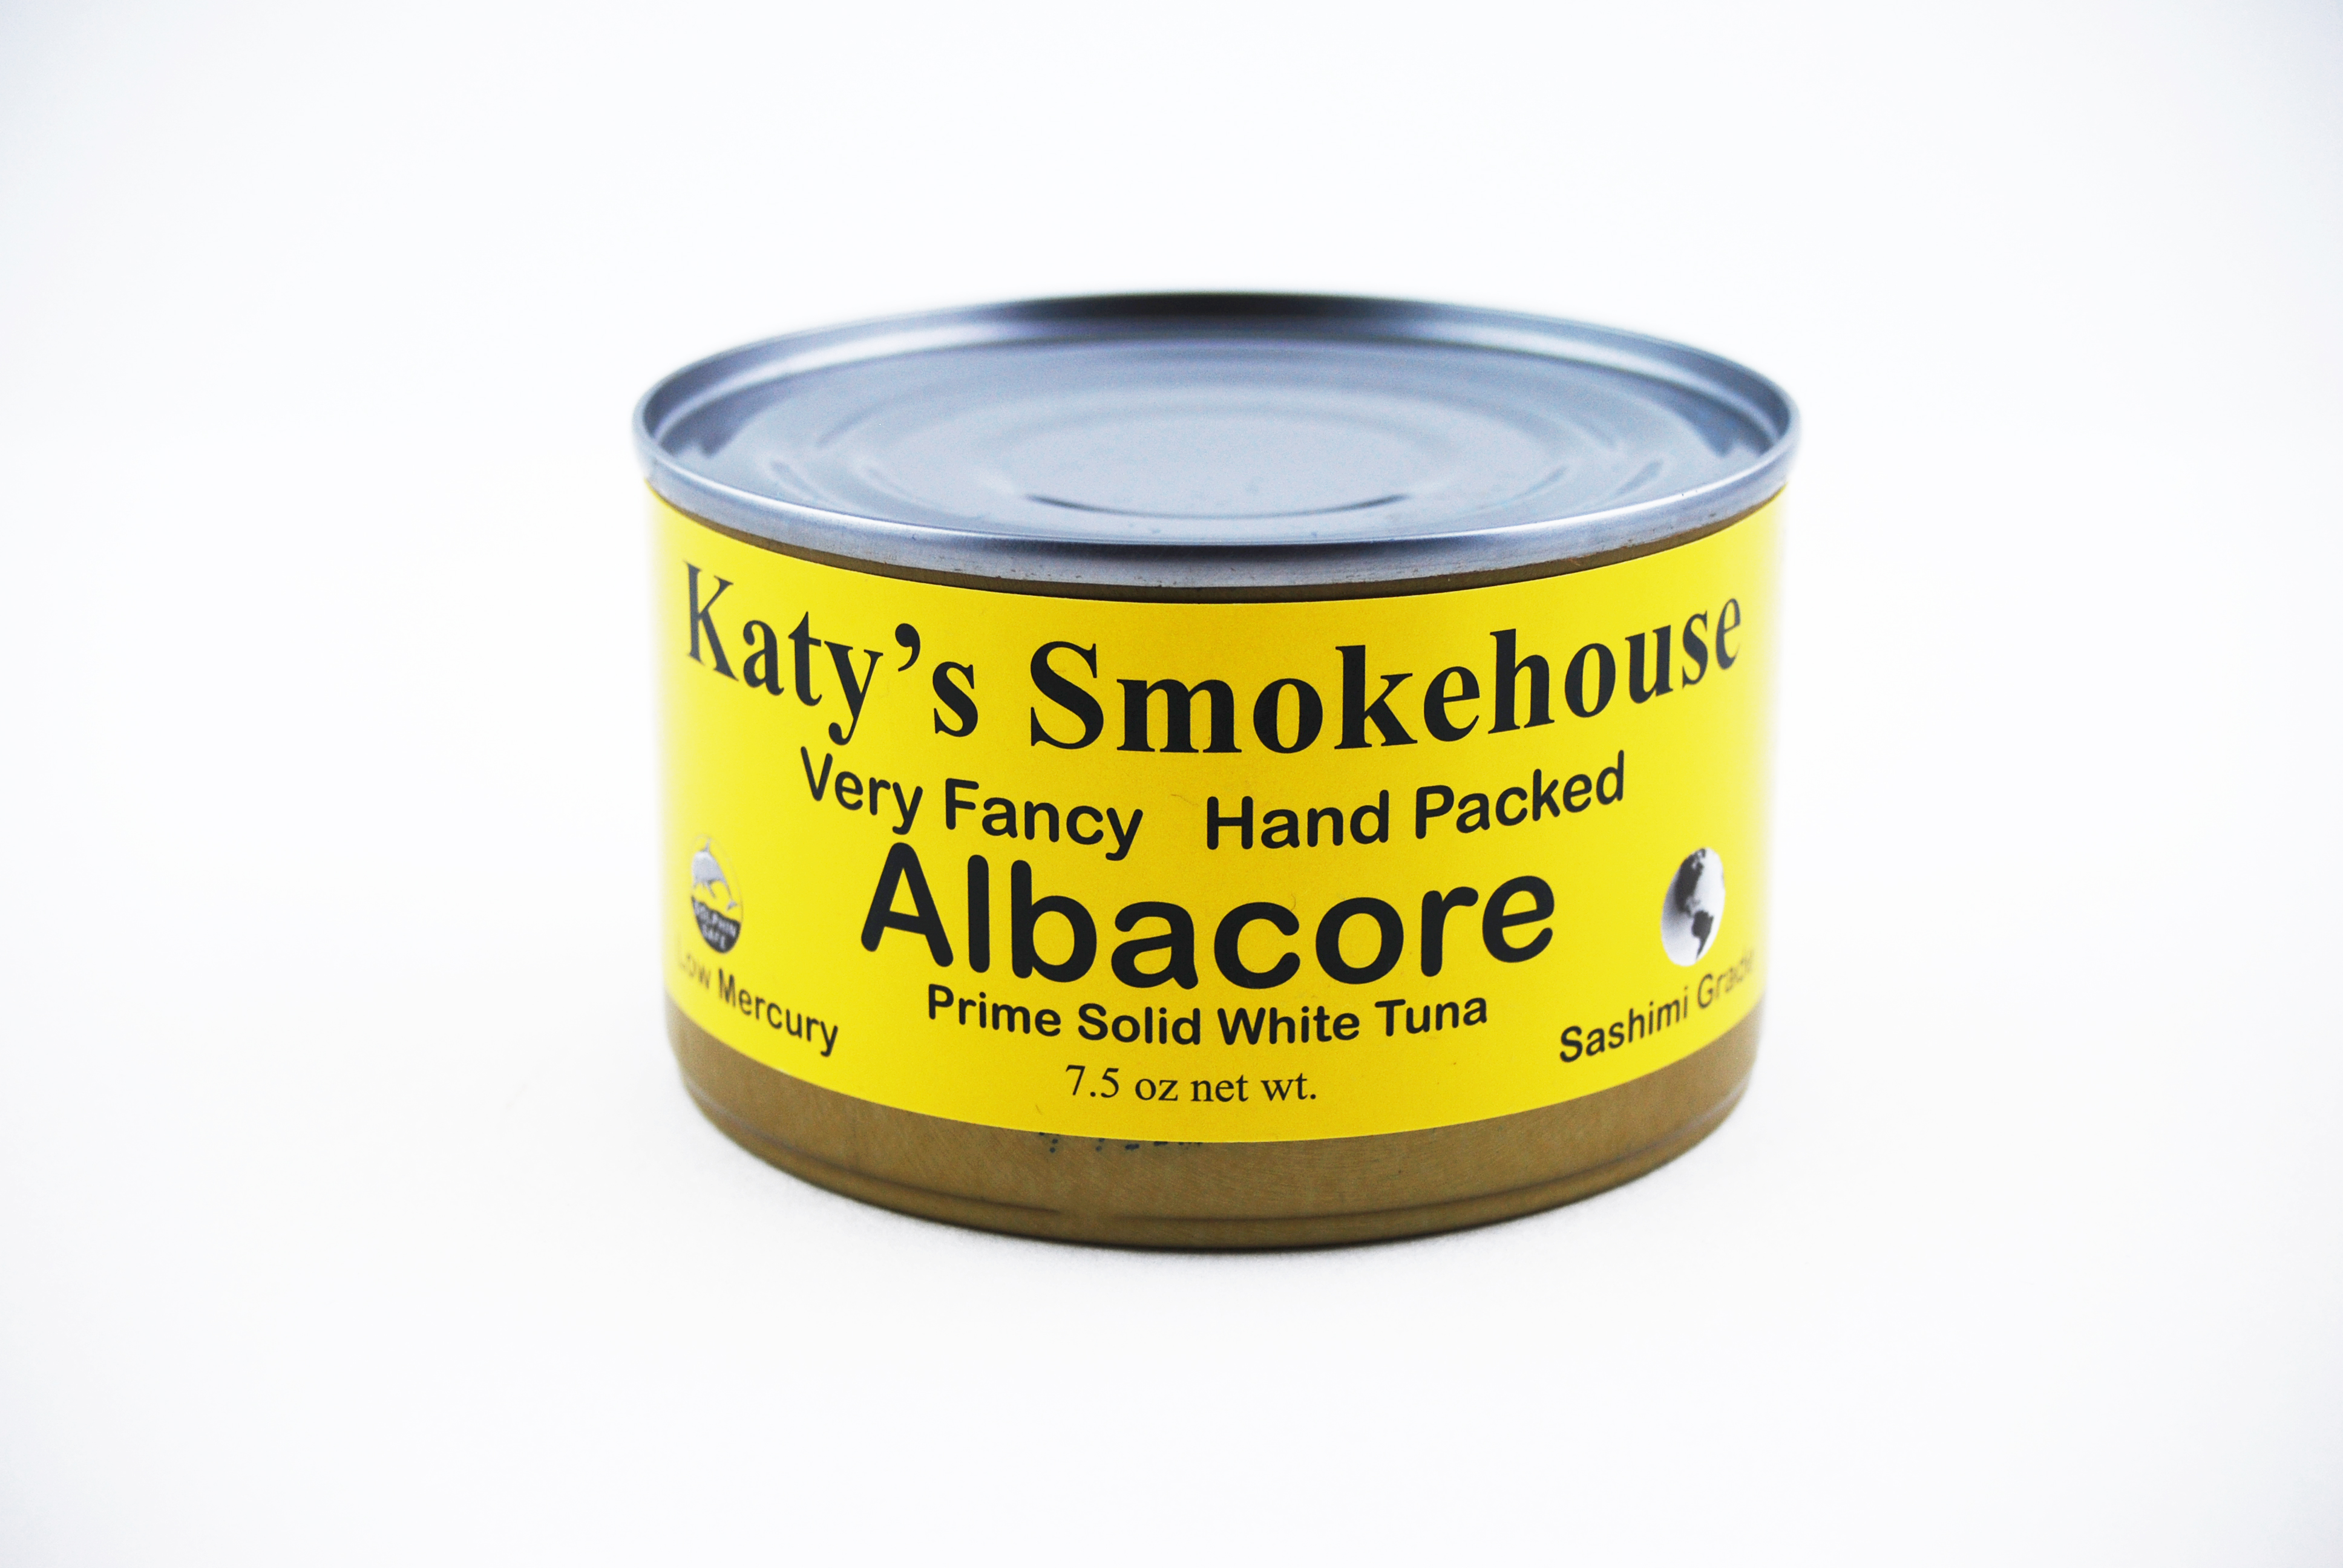 Where can I get albacore?